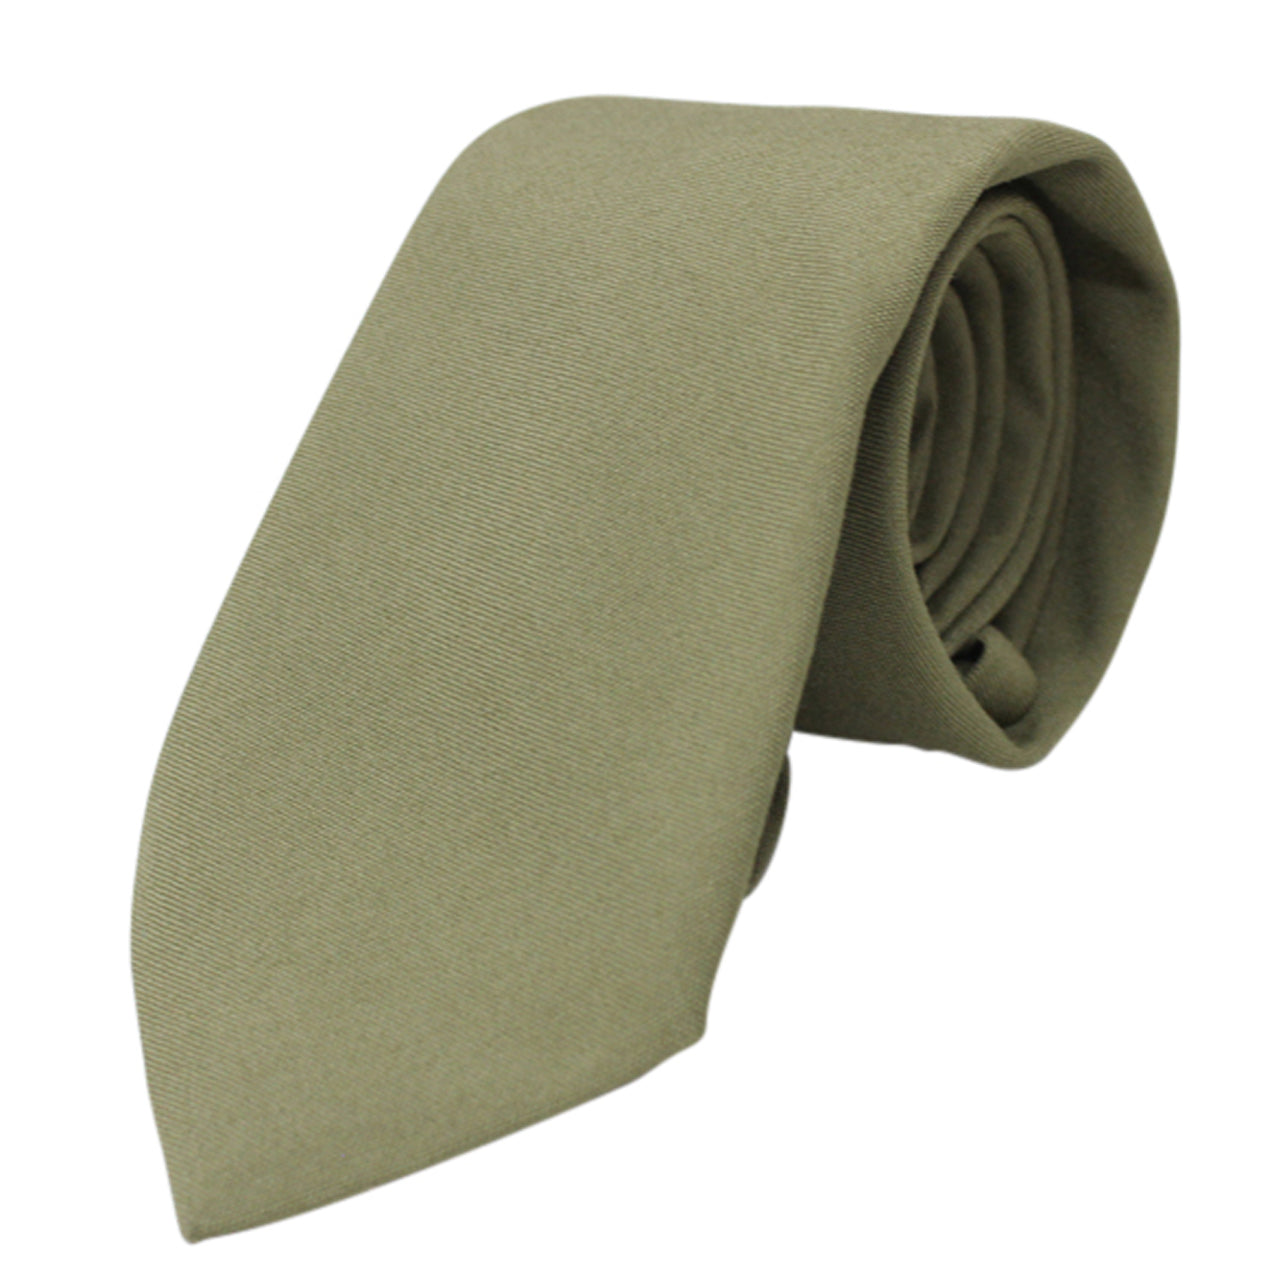 This polyester khaki necktie is great for putting together a costume for a dress up party or for formal safari attire.  Perfect for combining with our unissued military surplus Australian poly cotton long sleeve shirt. www.moralepatches.com.au